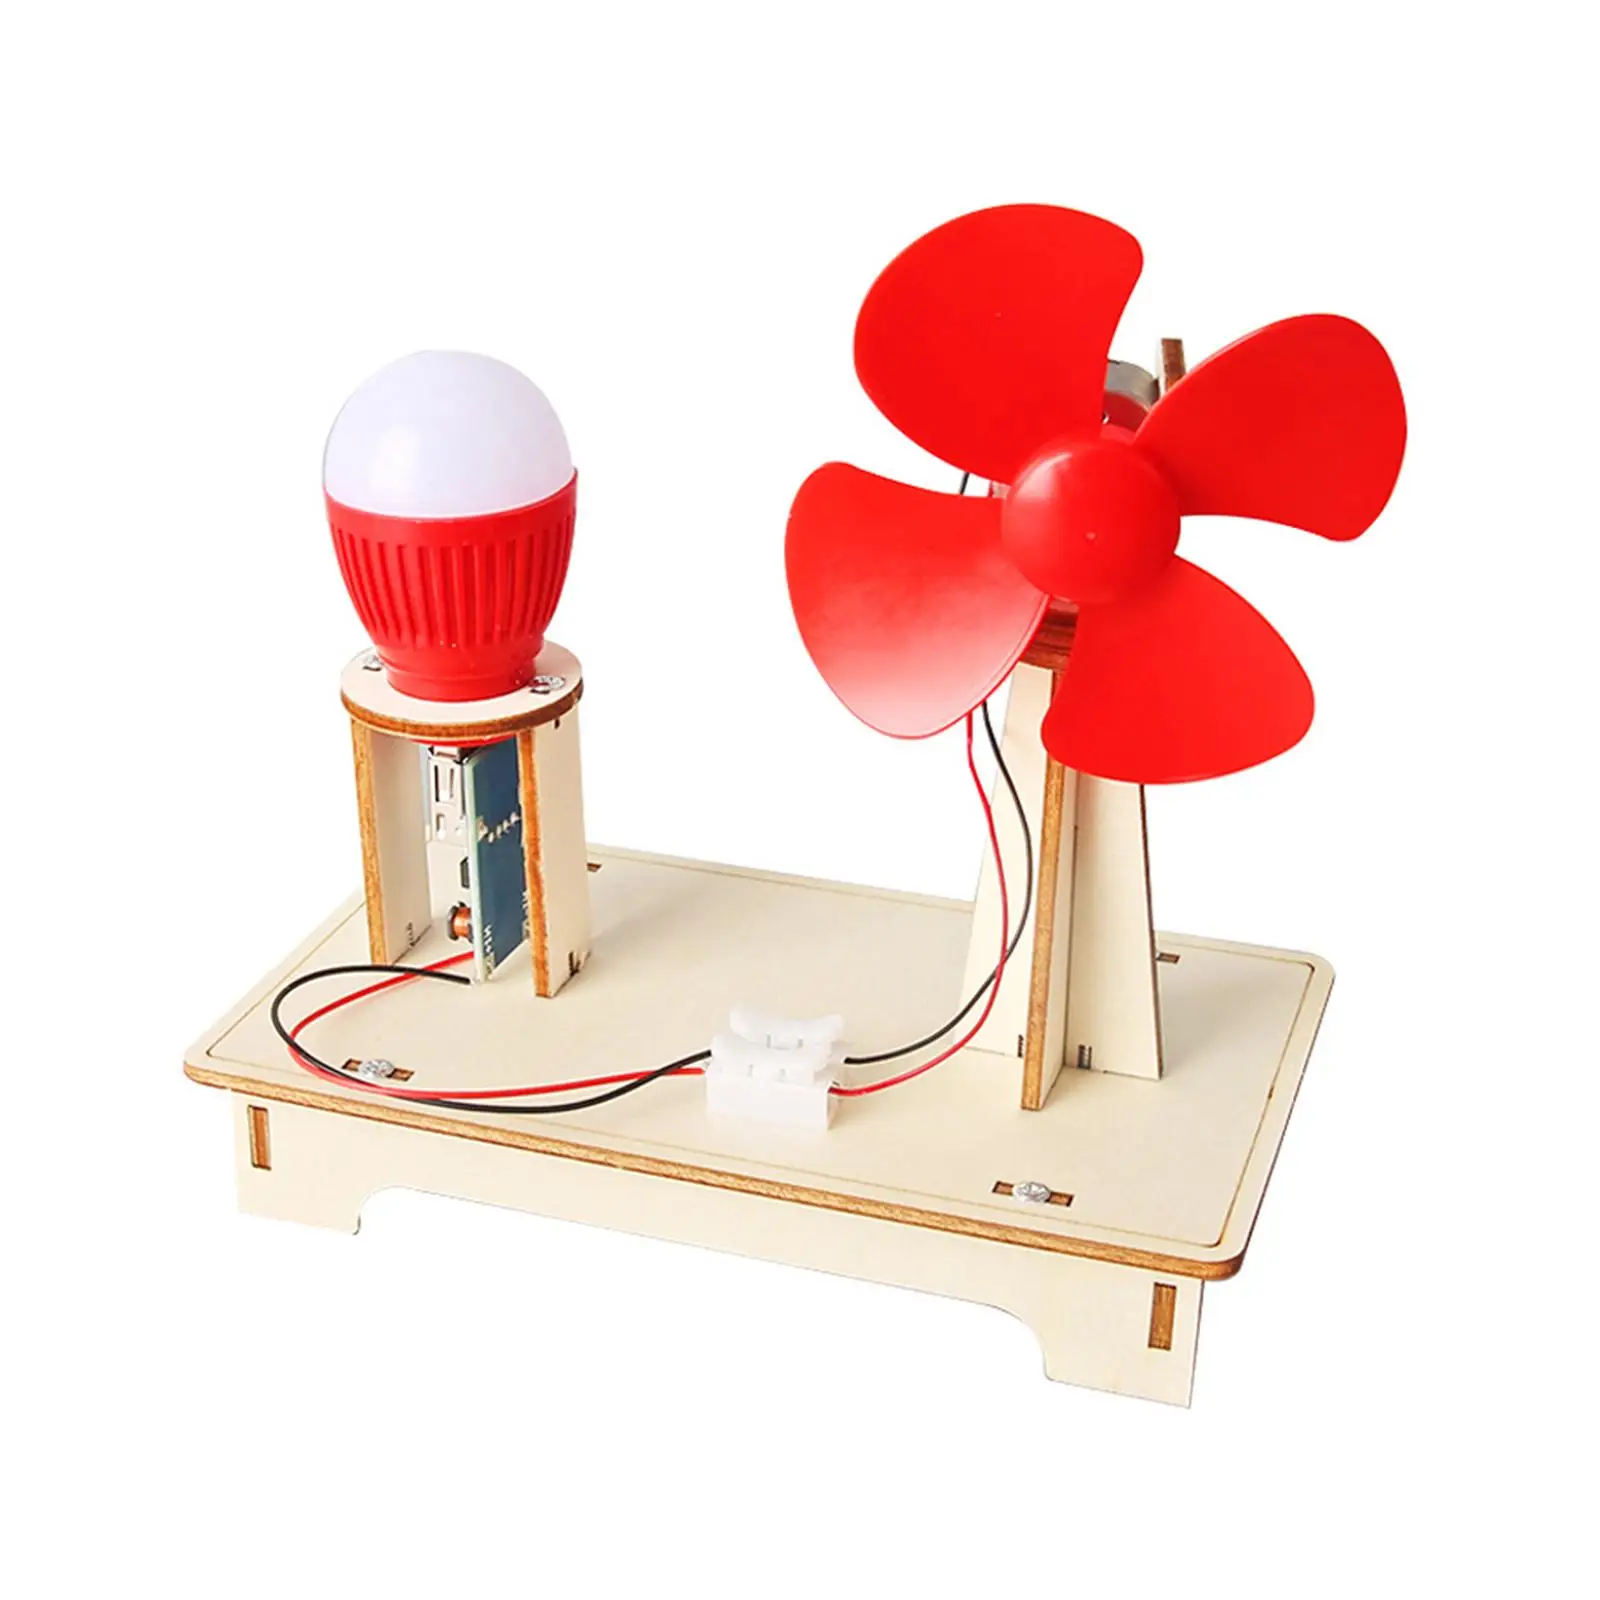 

Science Experiment Stem Projects Wind Turbines Technology Small Production Science Experiments DIY Kits for Children Teens Gifts